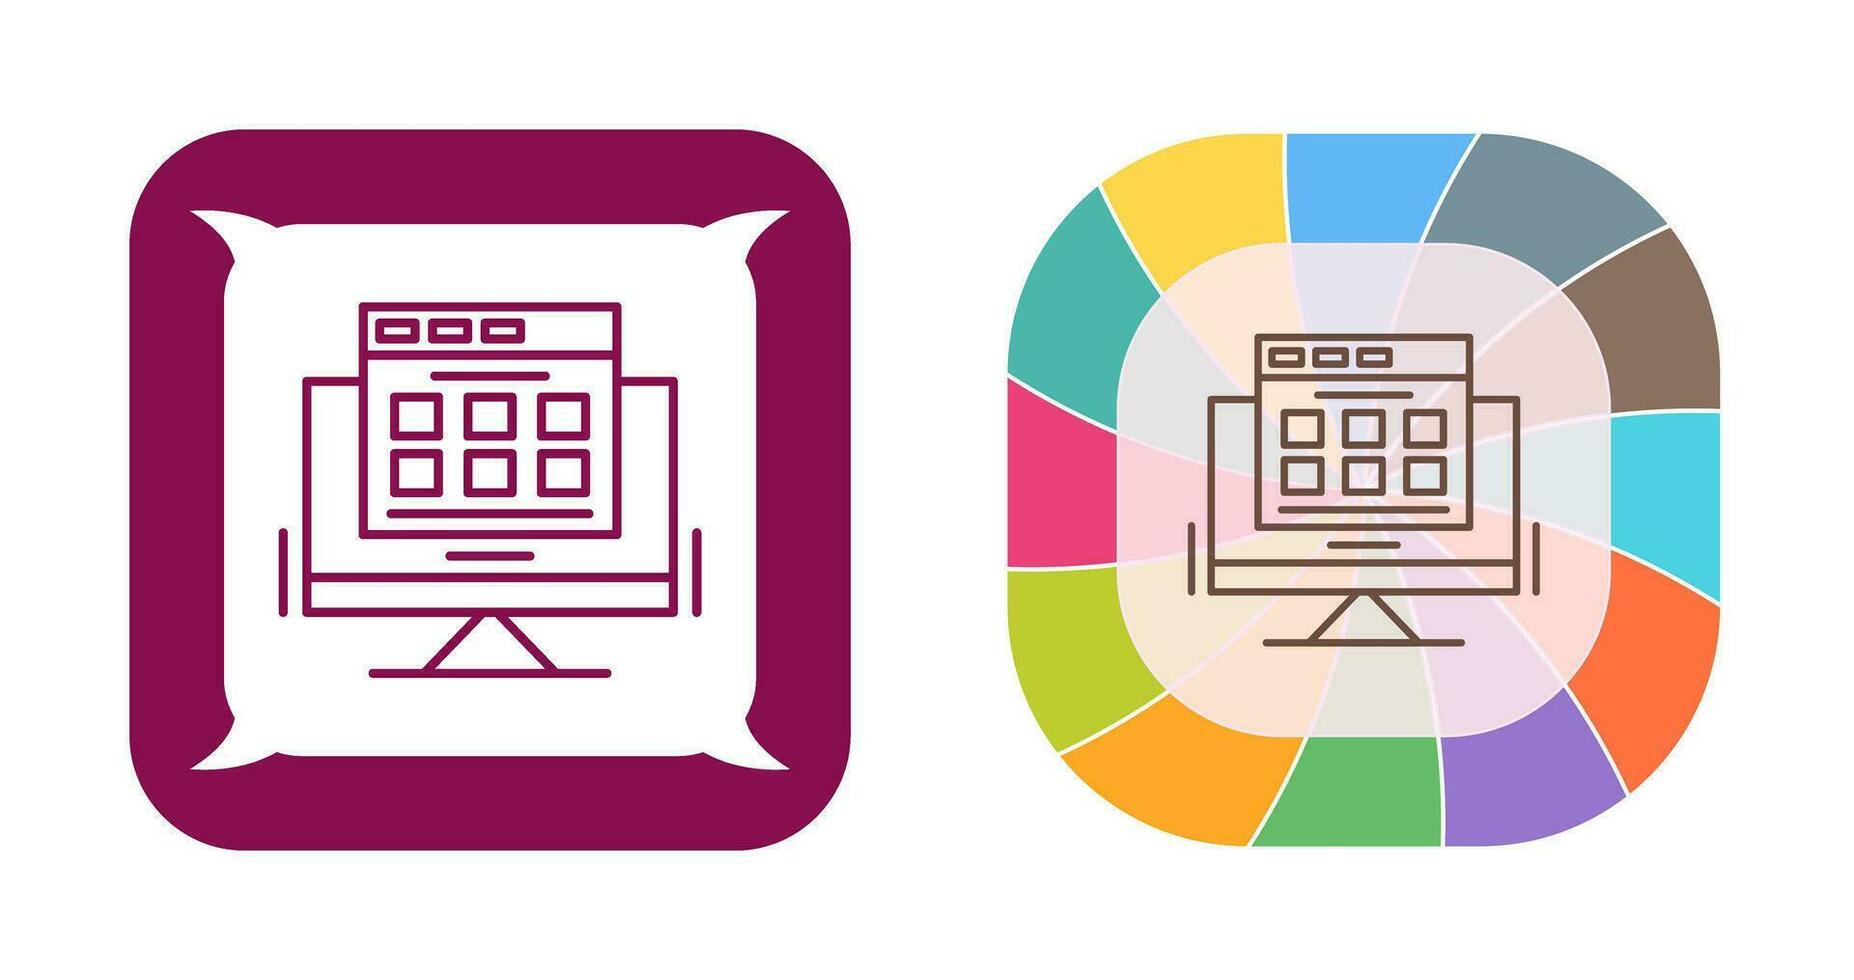 Select Product Vector Icon